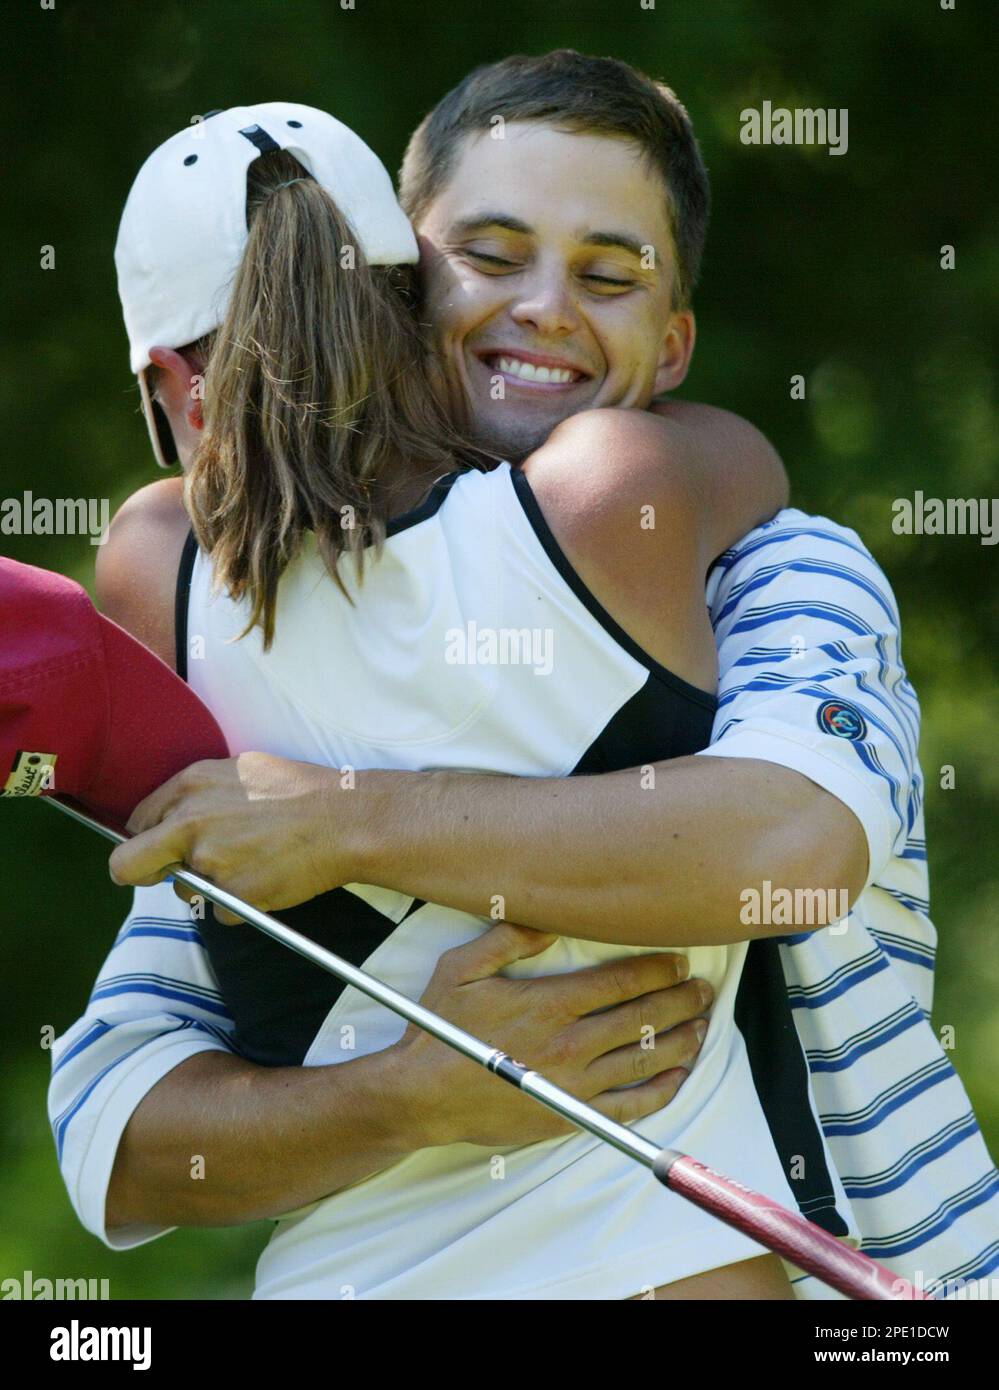 Corey Poulin, right, gets a hug from his sister and caddy, Crystal  Levesque, Friday, July 15, 2005 after winning the Maine Amateur  Championship at the Boothbay Country Club, in Boothbay, Maine. Poulin